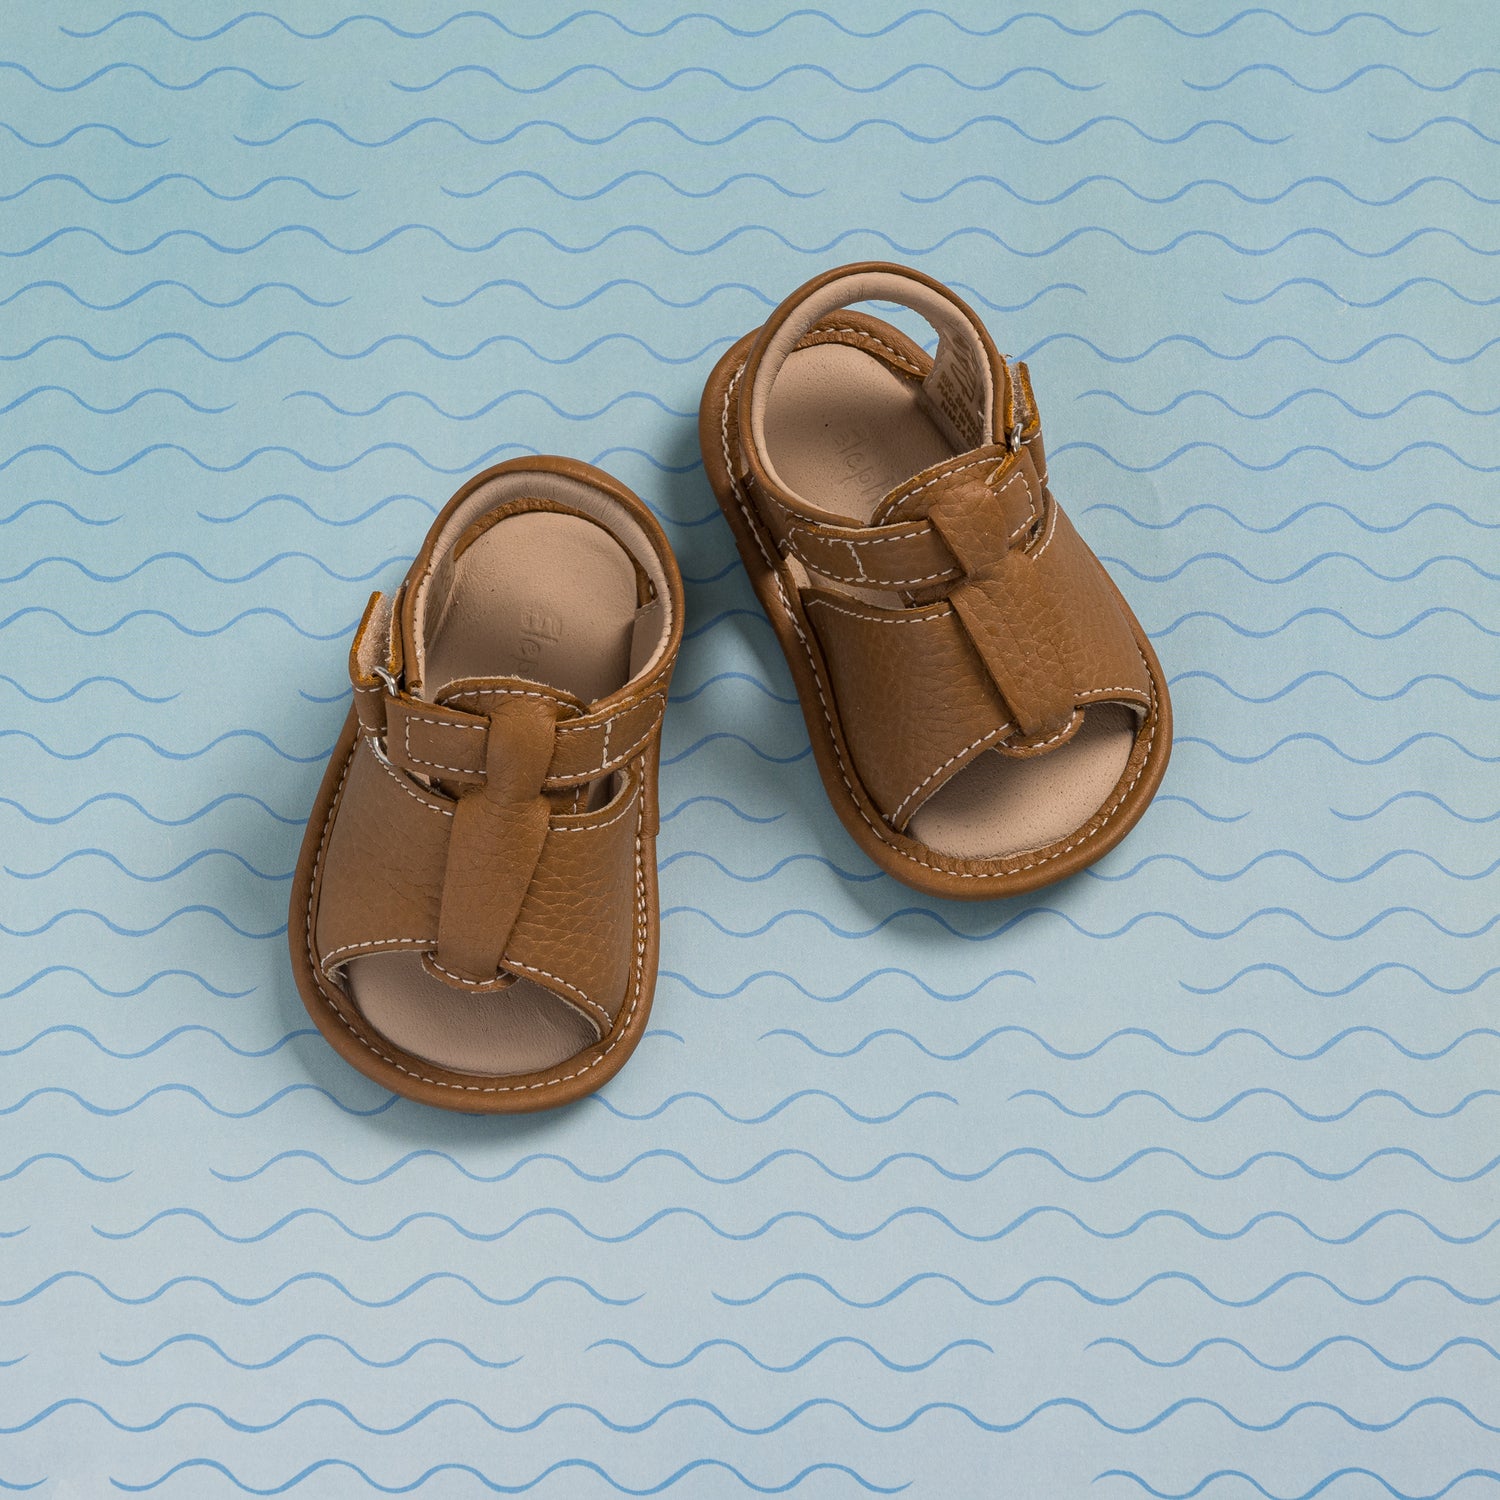 Baby Boy Shoes Sandals